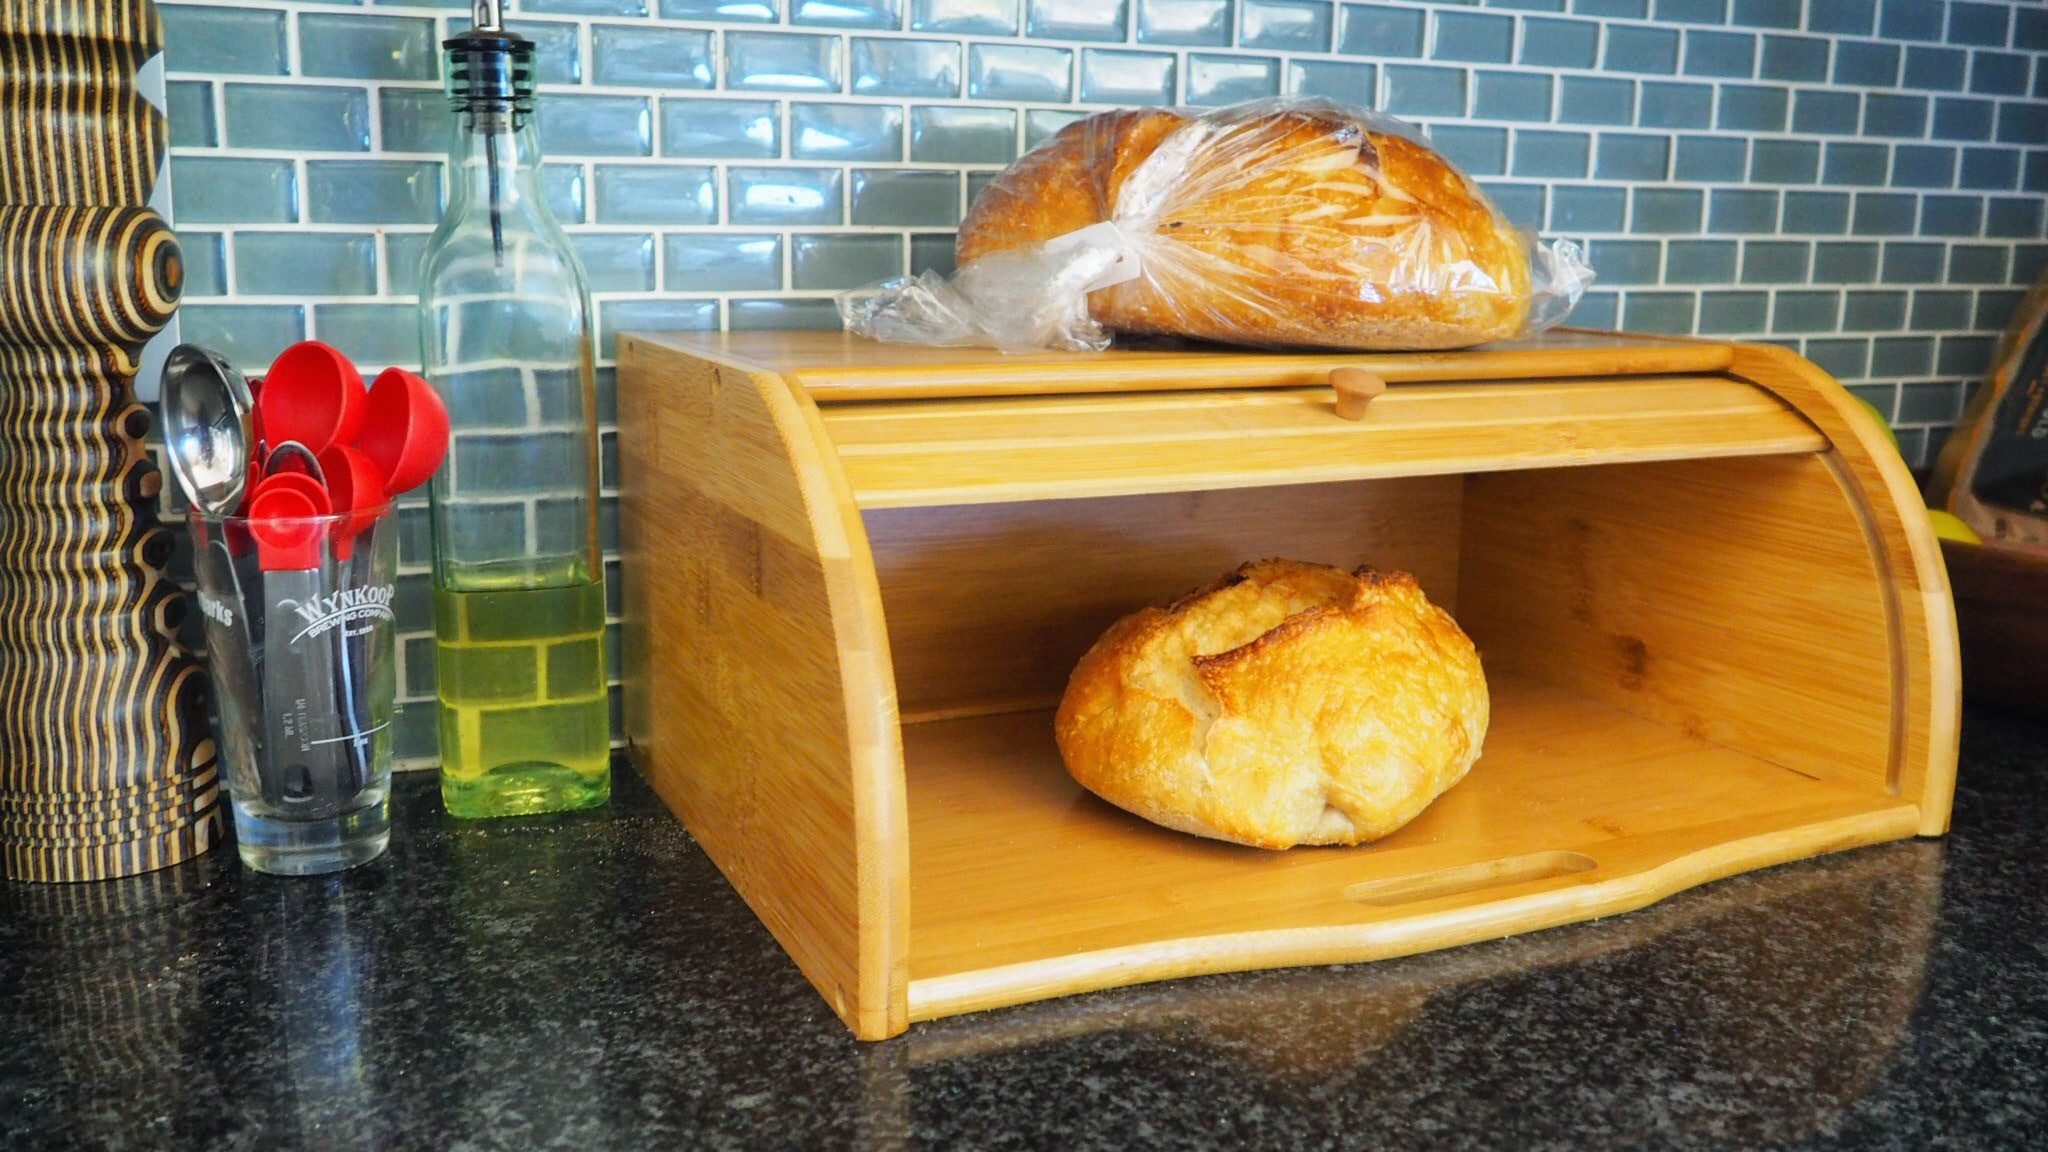 The Kitchen Feature You Love or Hate — Taking Down the Breadbox